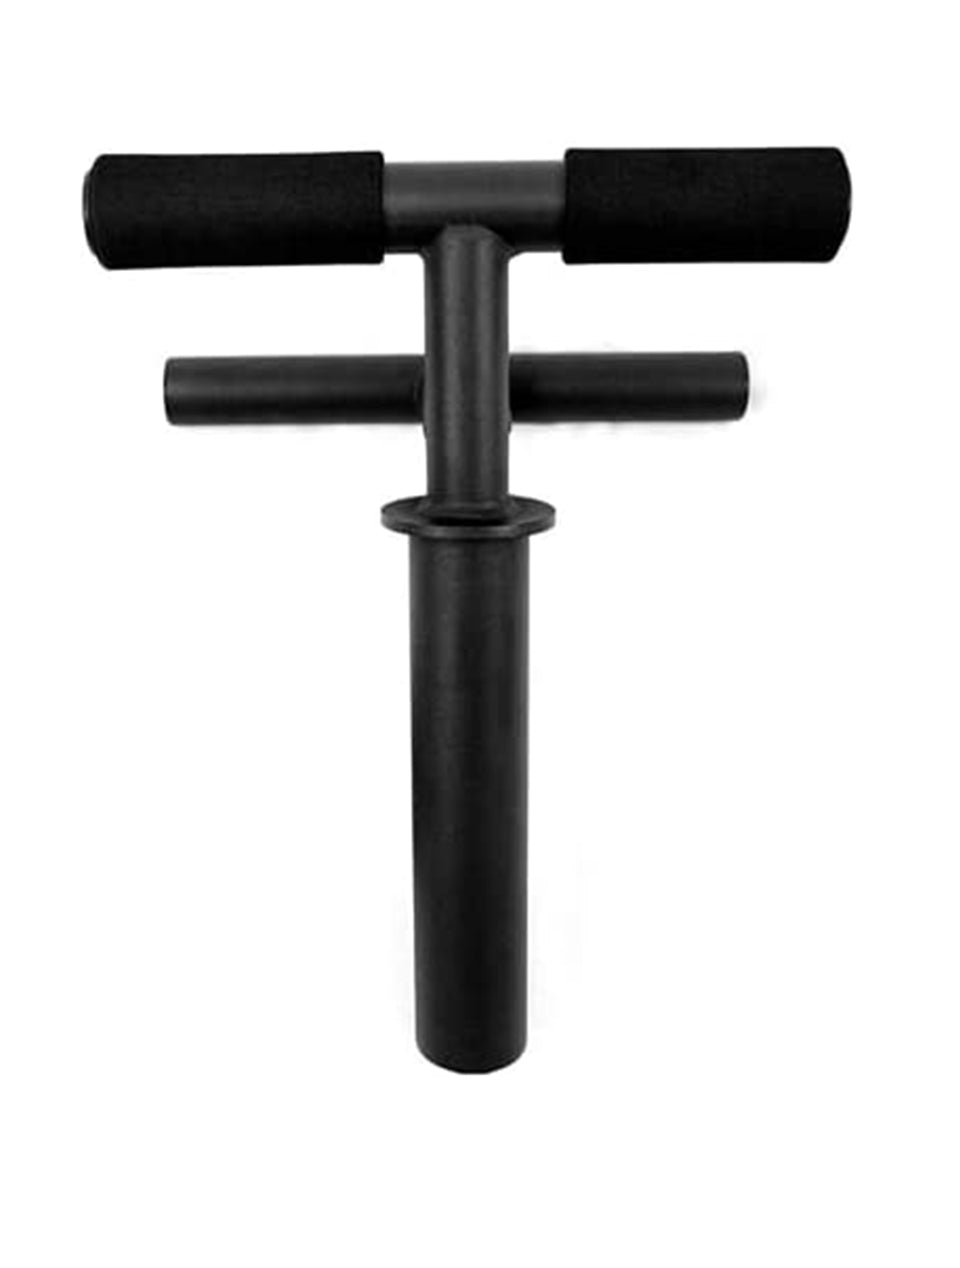 1441 Fitness Olympic Tib Curl Bar - Tibialis Bar for Knee and Shin Strengthening